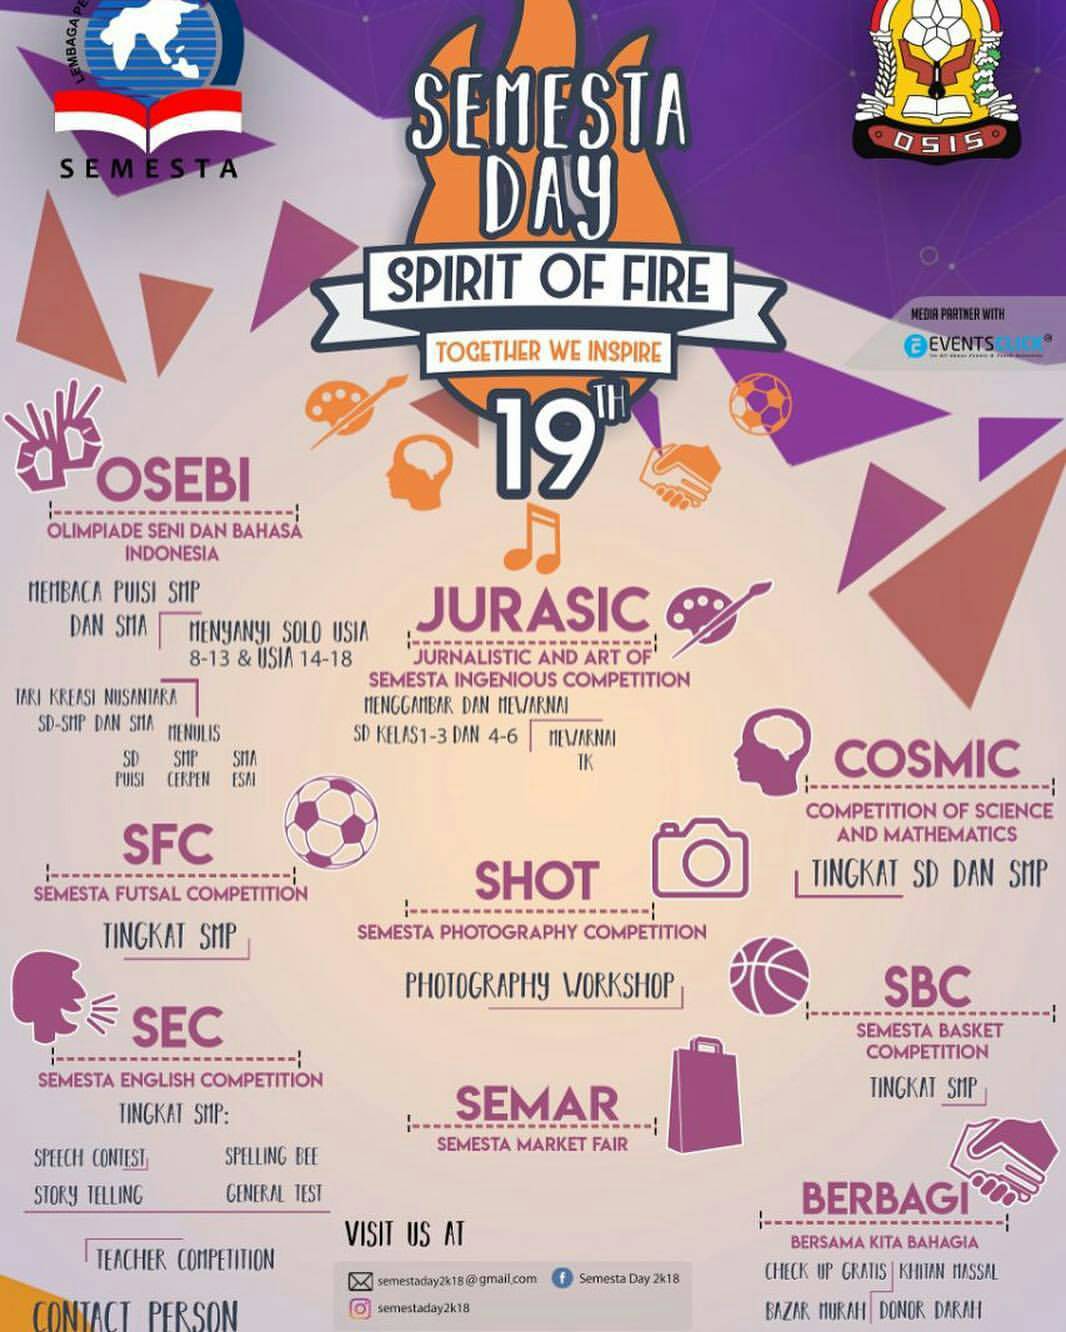 EVENT COMPETITION TO CELEBRATE THE 19TH BIRTHDAY OF SEMESTA SCHOOL IN SEMARANG